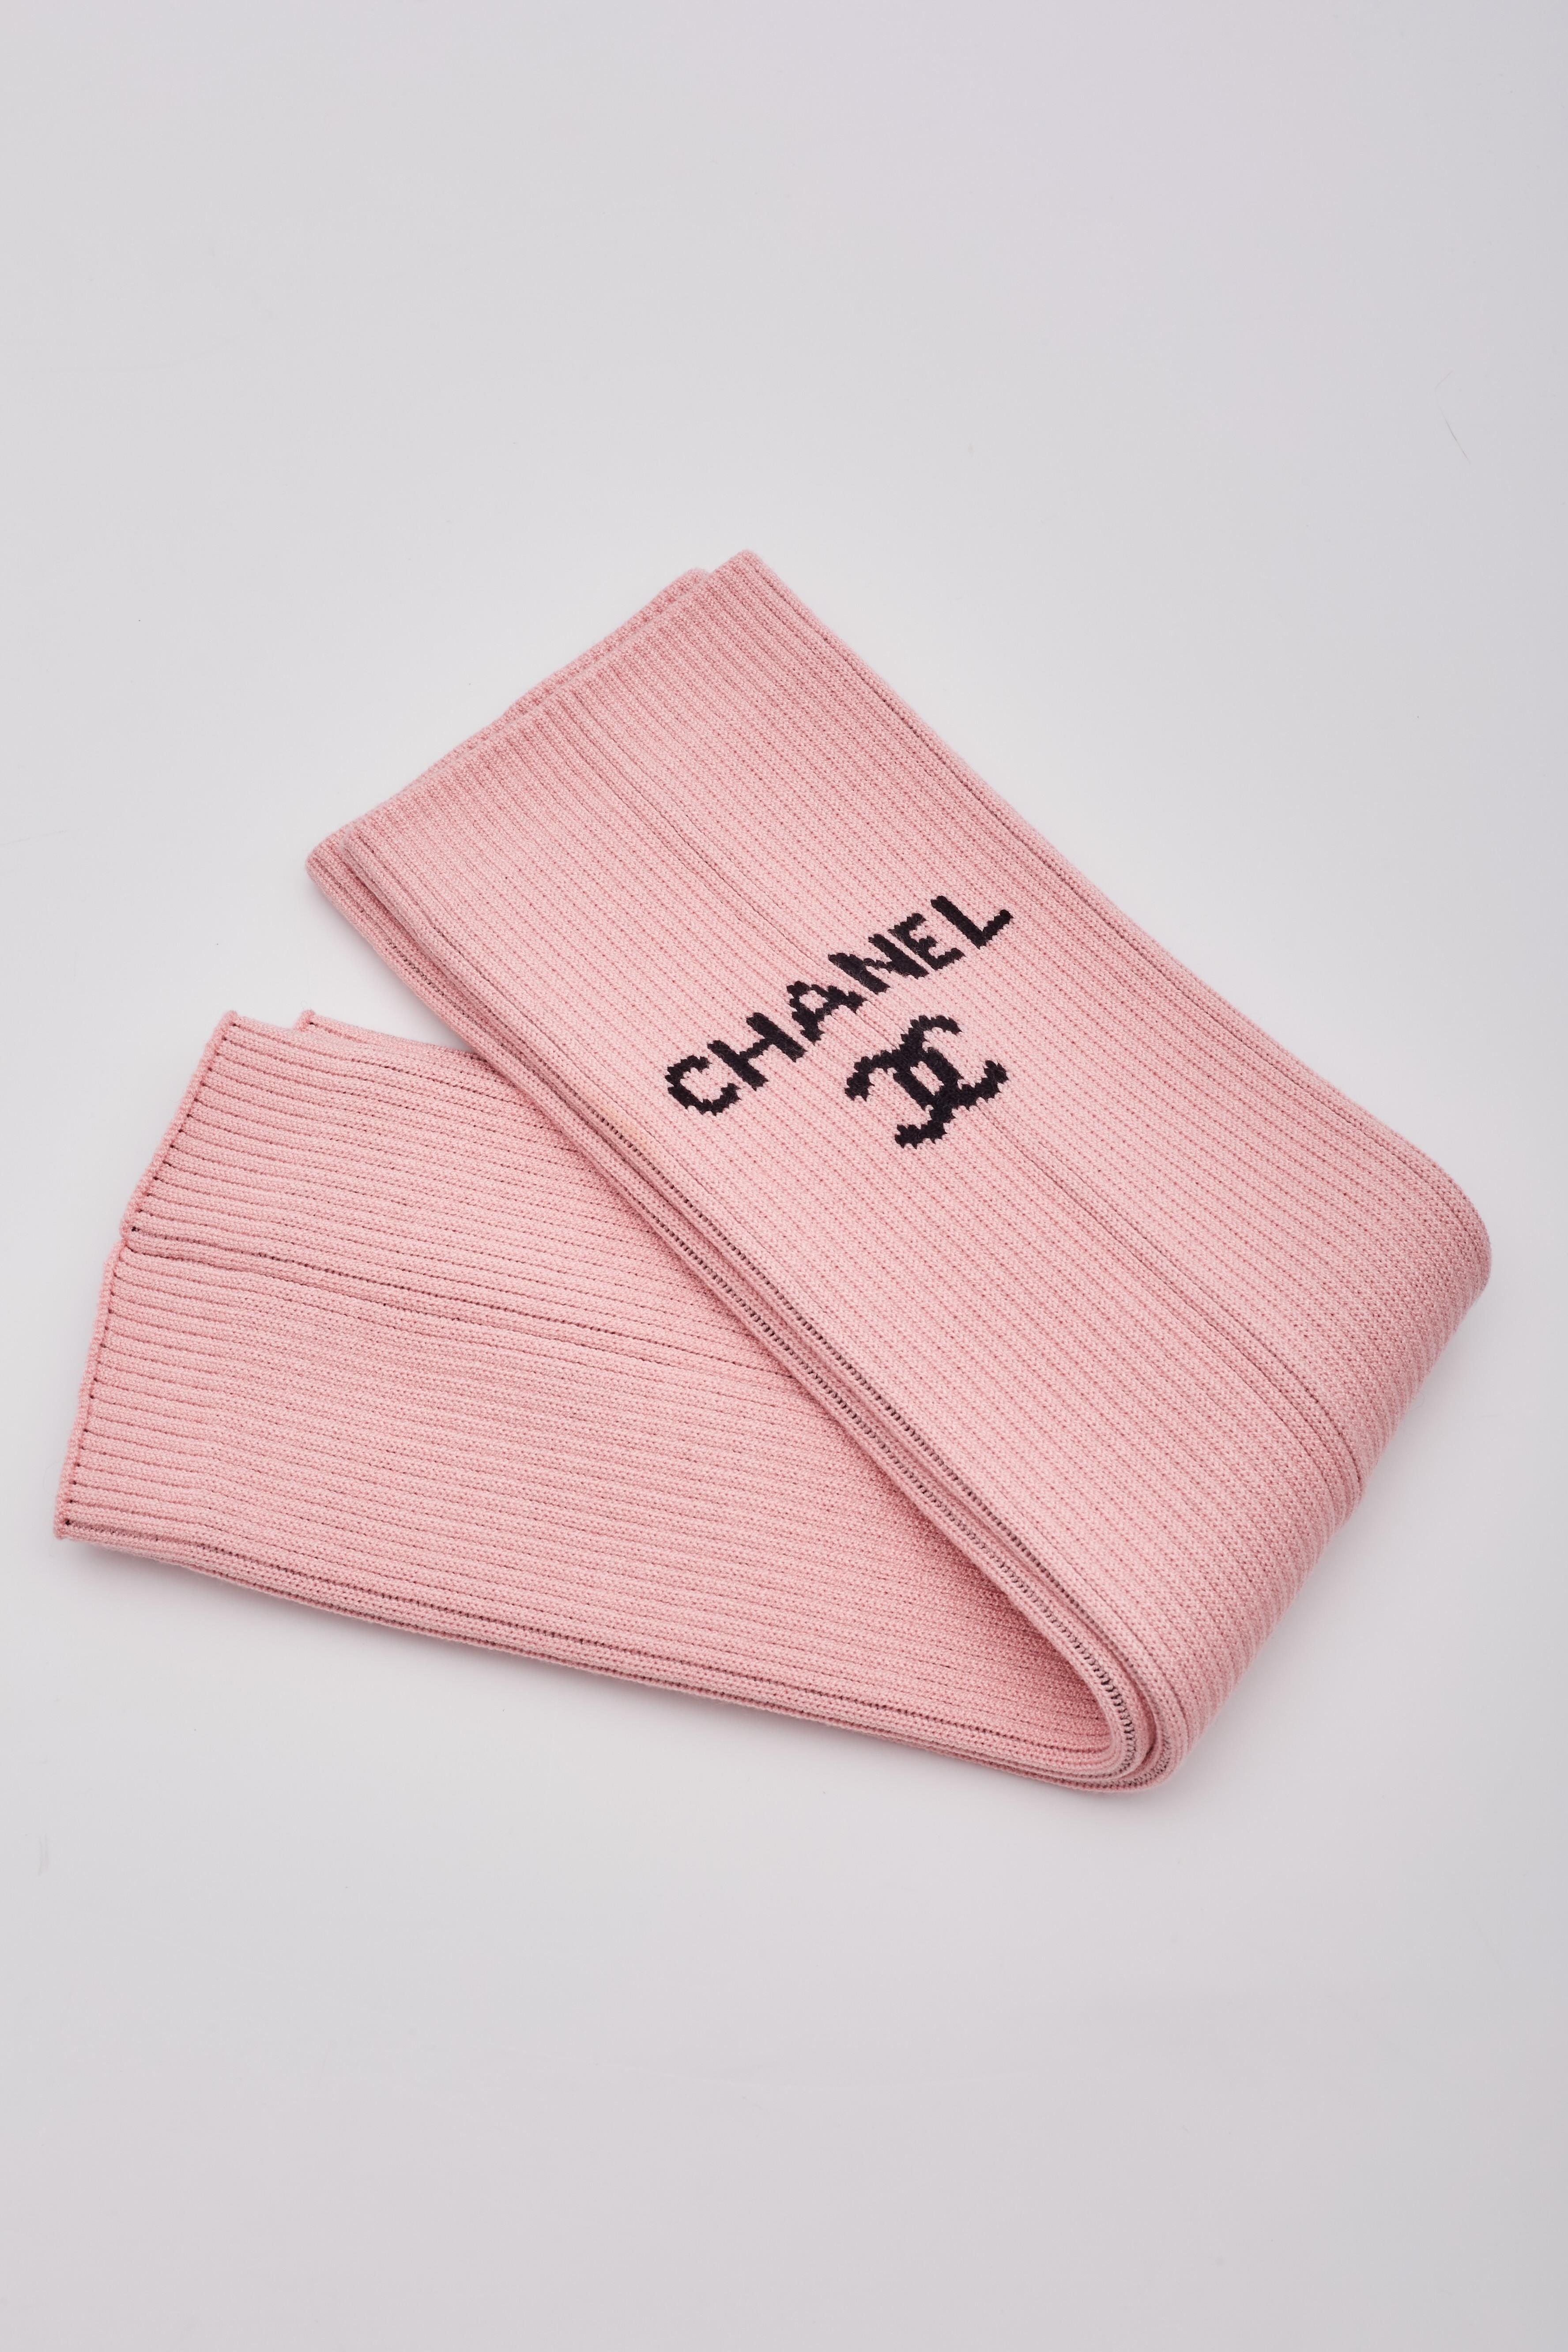 Chanel Logo Pink Knit Leg Warmers Gaiters For Sale 2